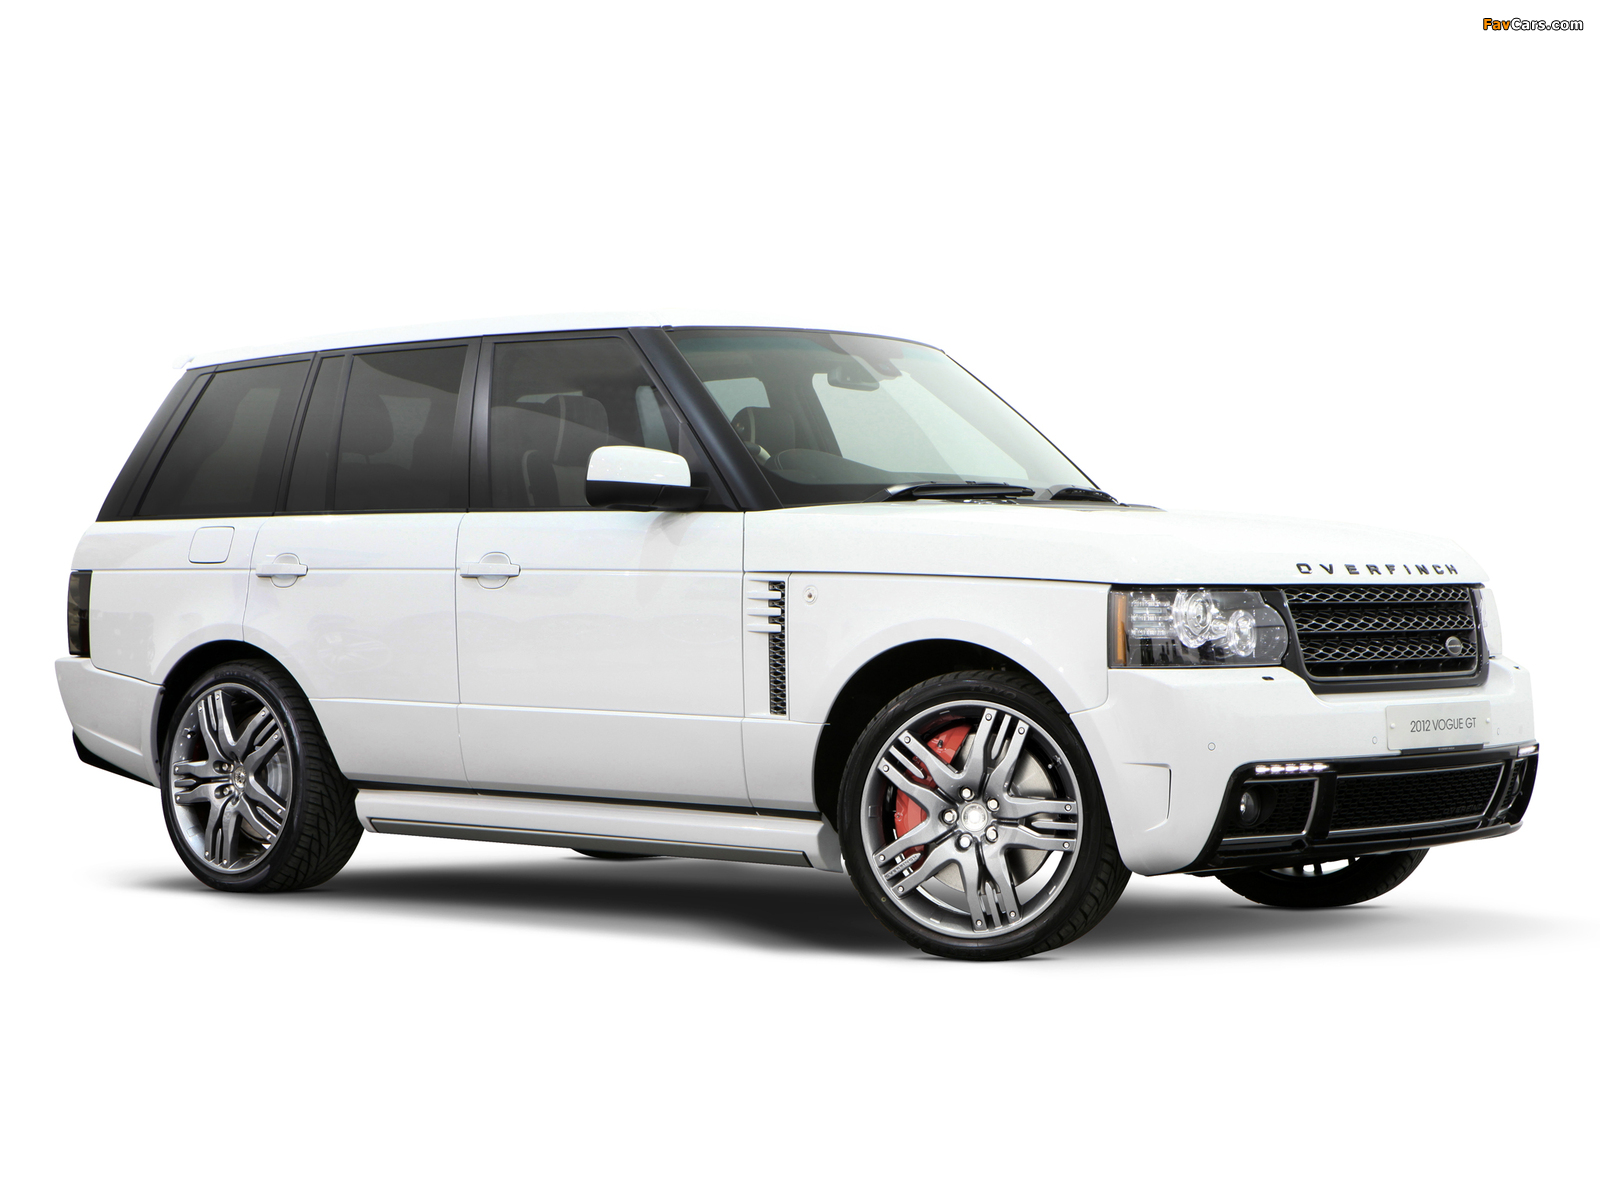 Overfinch Range Rover Vogue GT (L322) 2012 wallpapers (1600 x 1200)